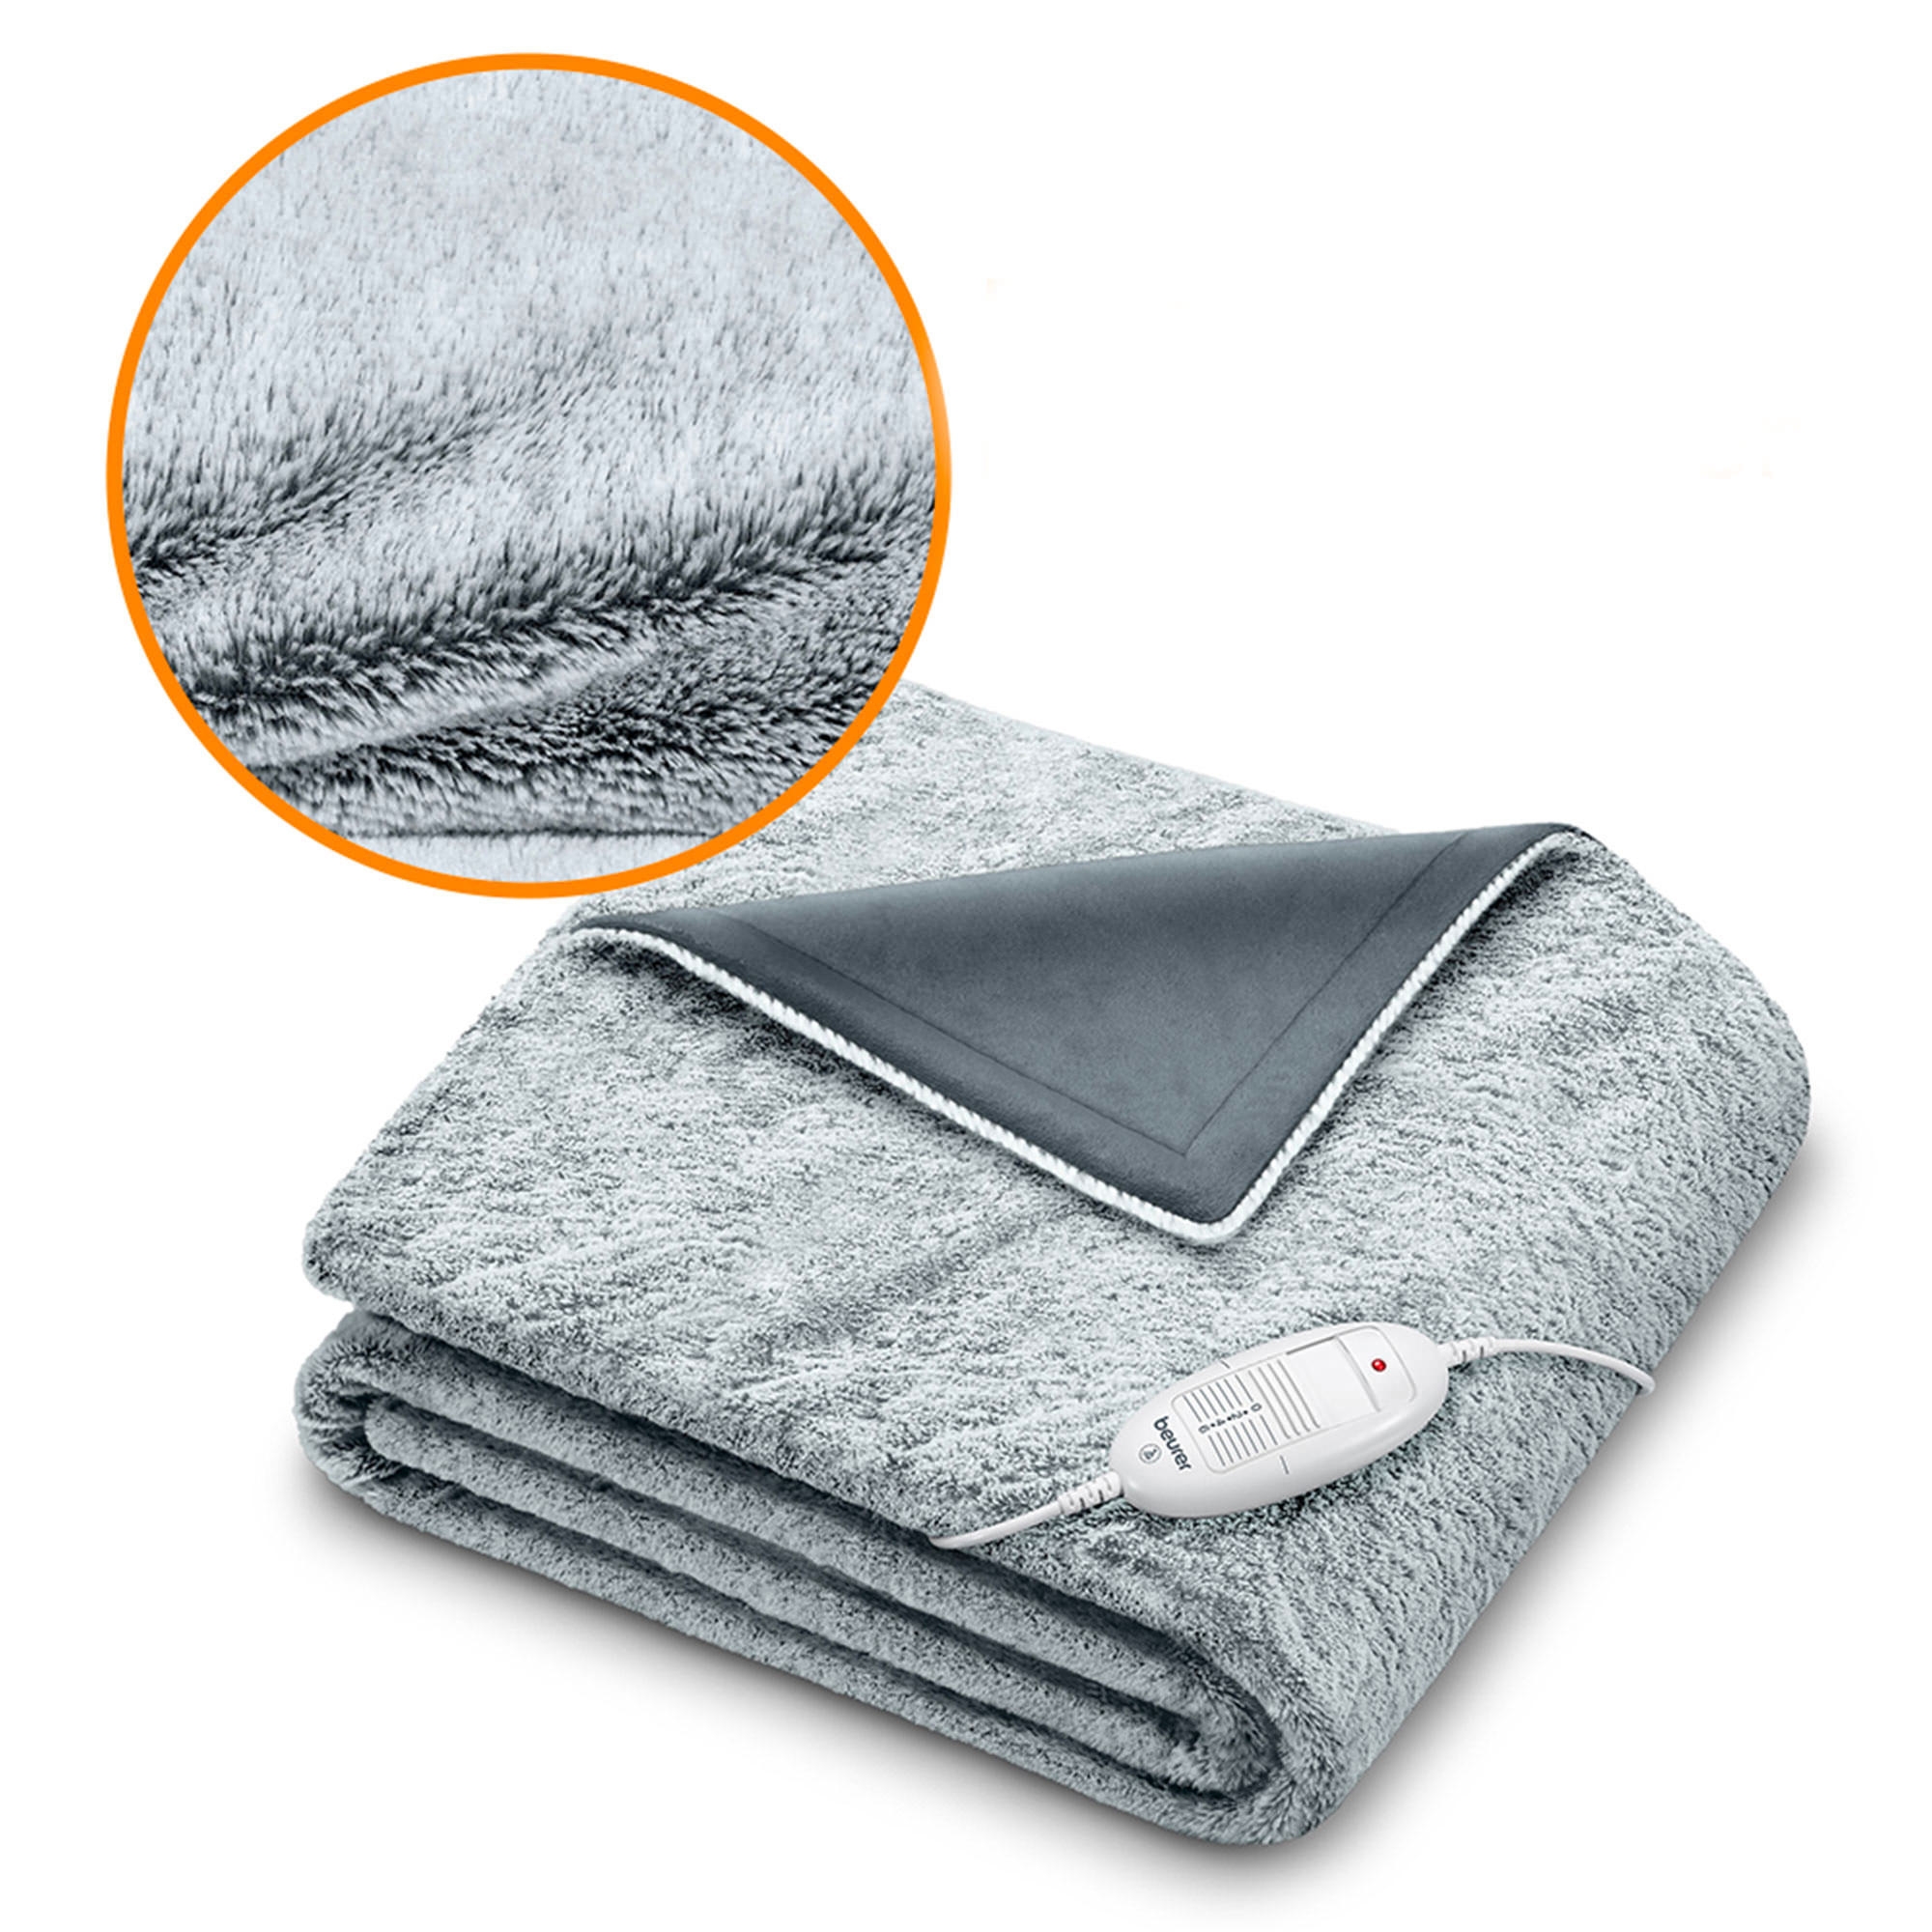 Beurer Super Cosy Heated Throw Blanket Charcoal Grey Image 2